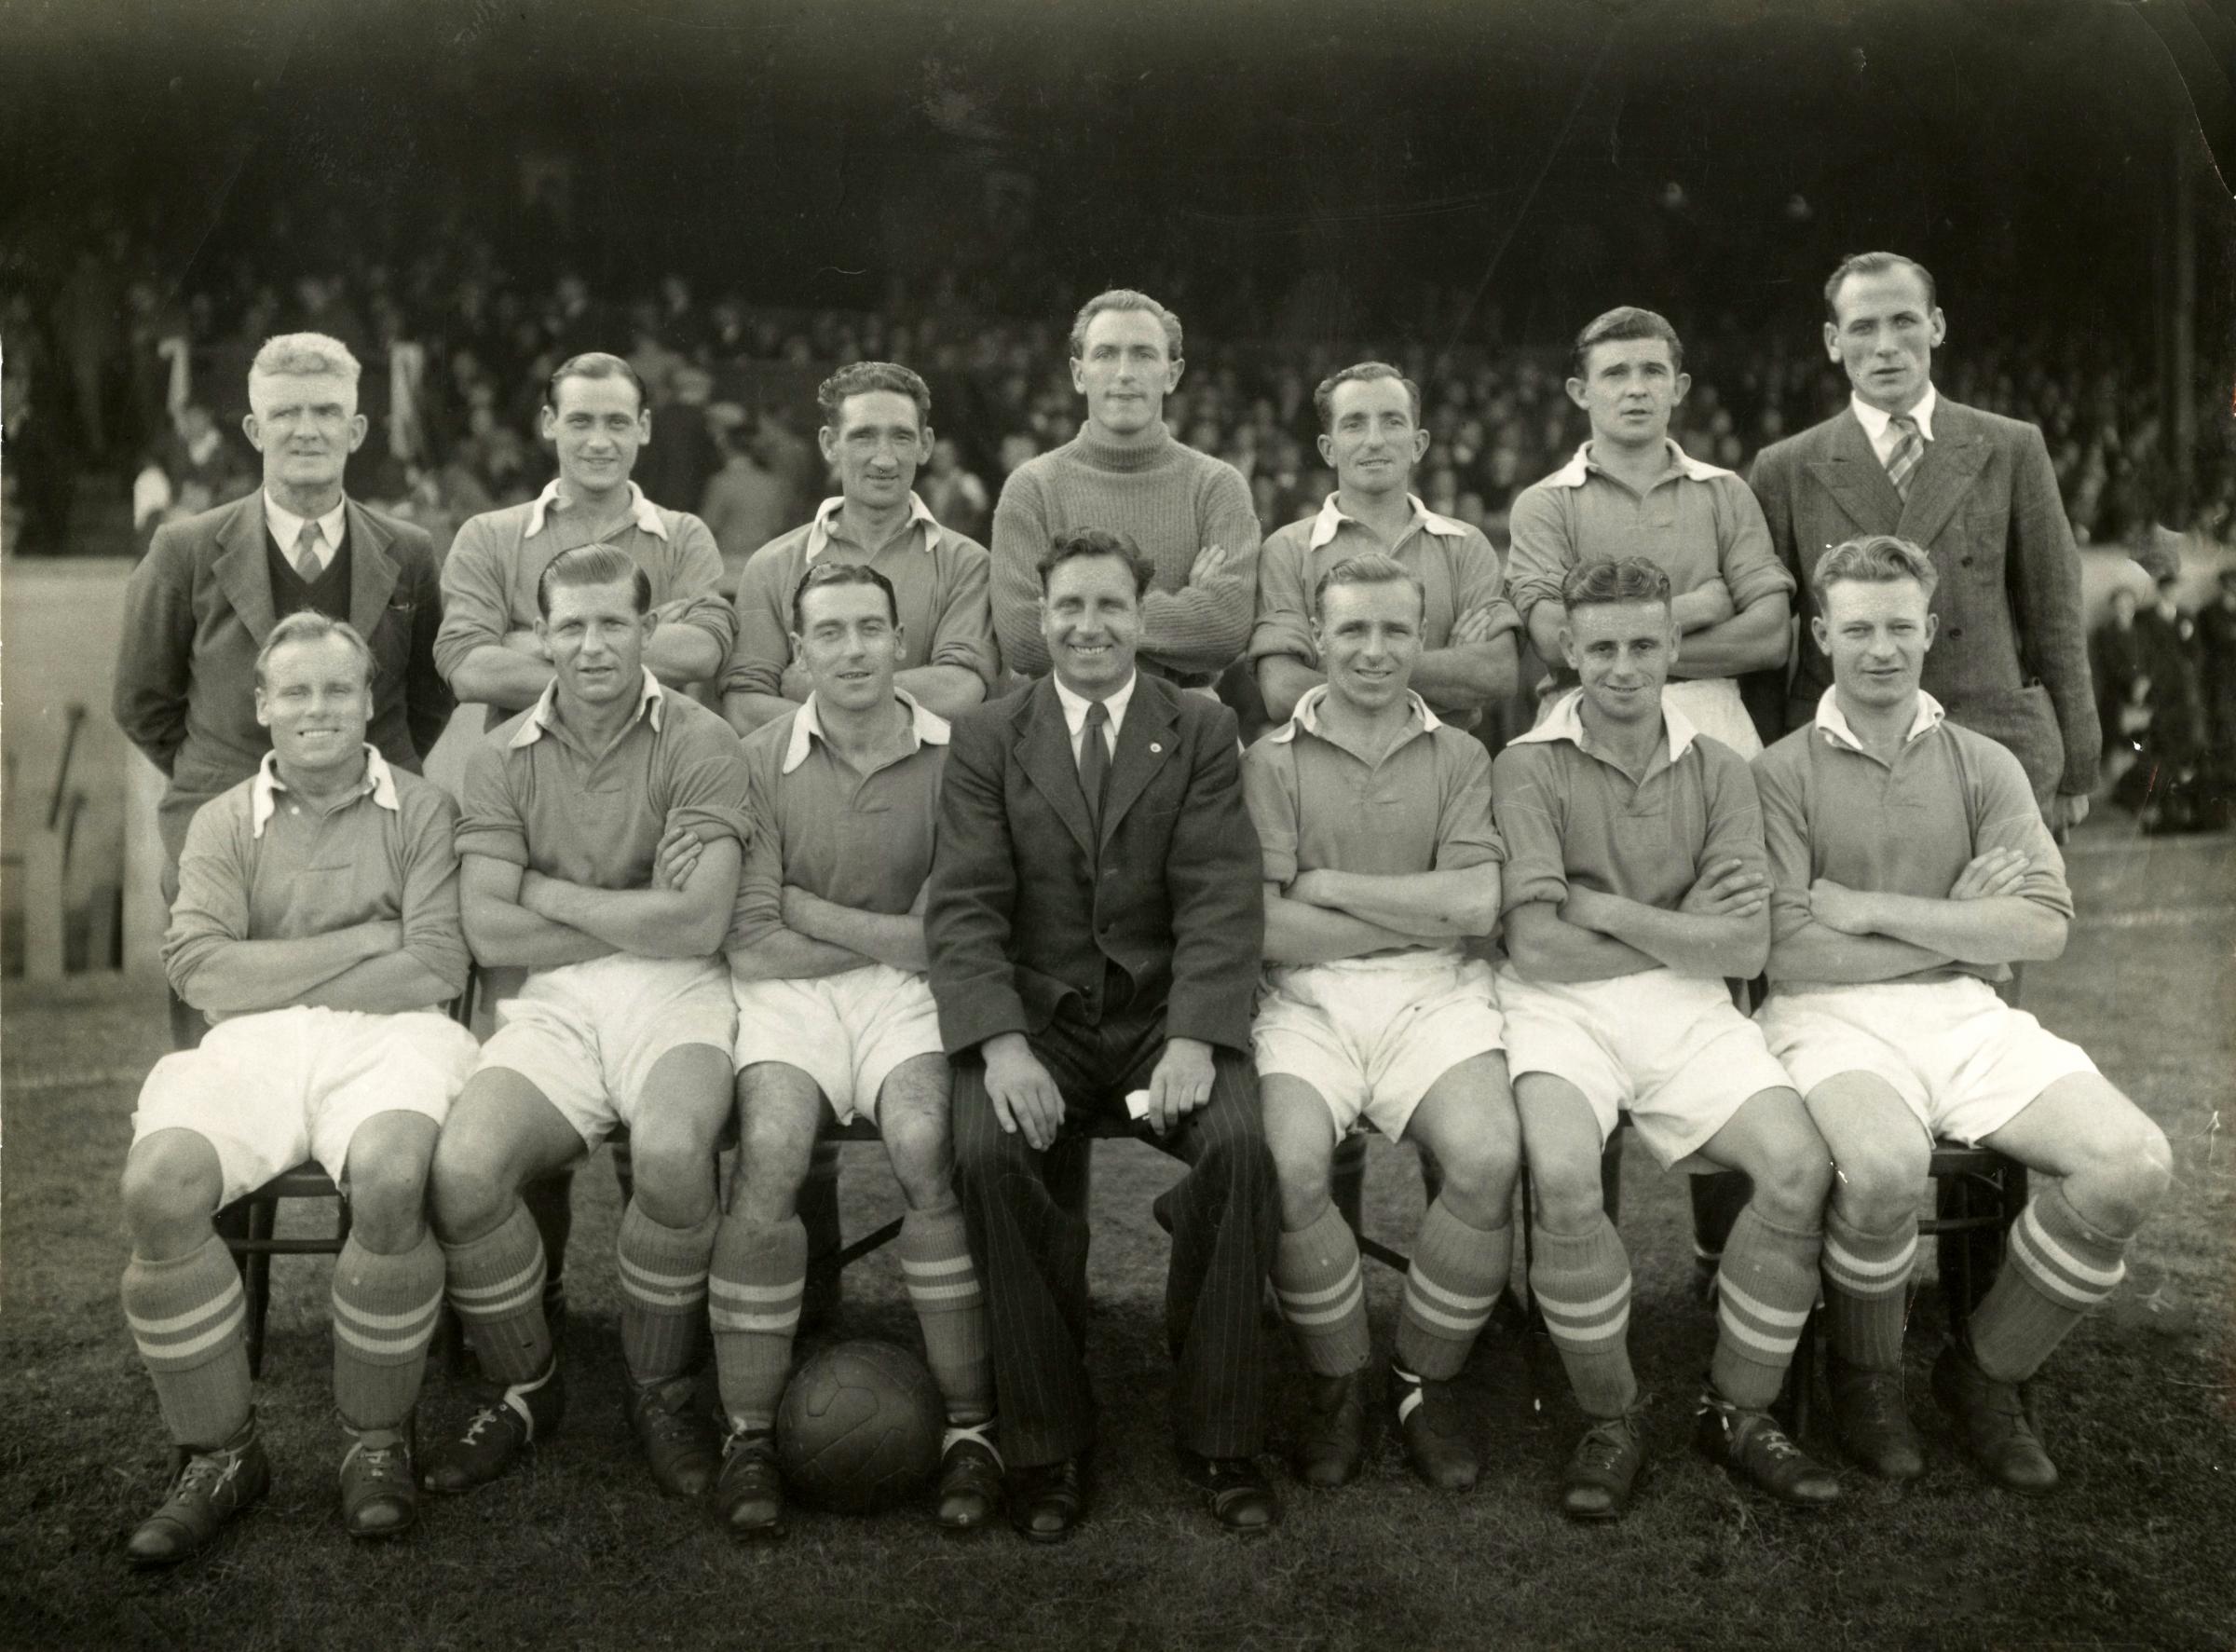 Watford won six of their final nine matches in 1947/48 to pull away from the basement of Division Three (South)